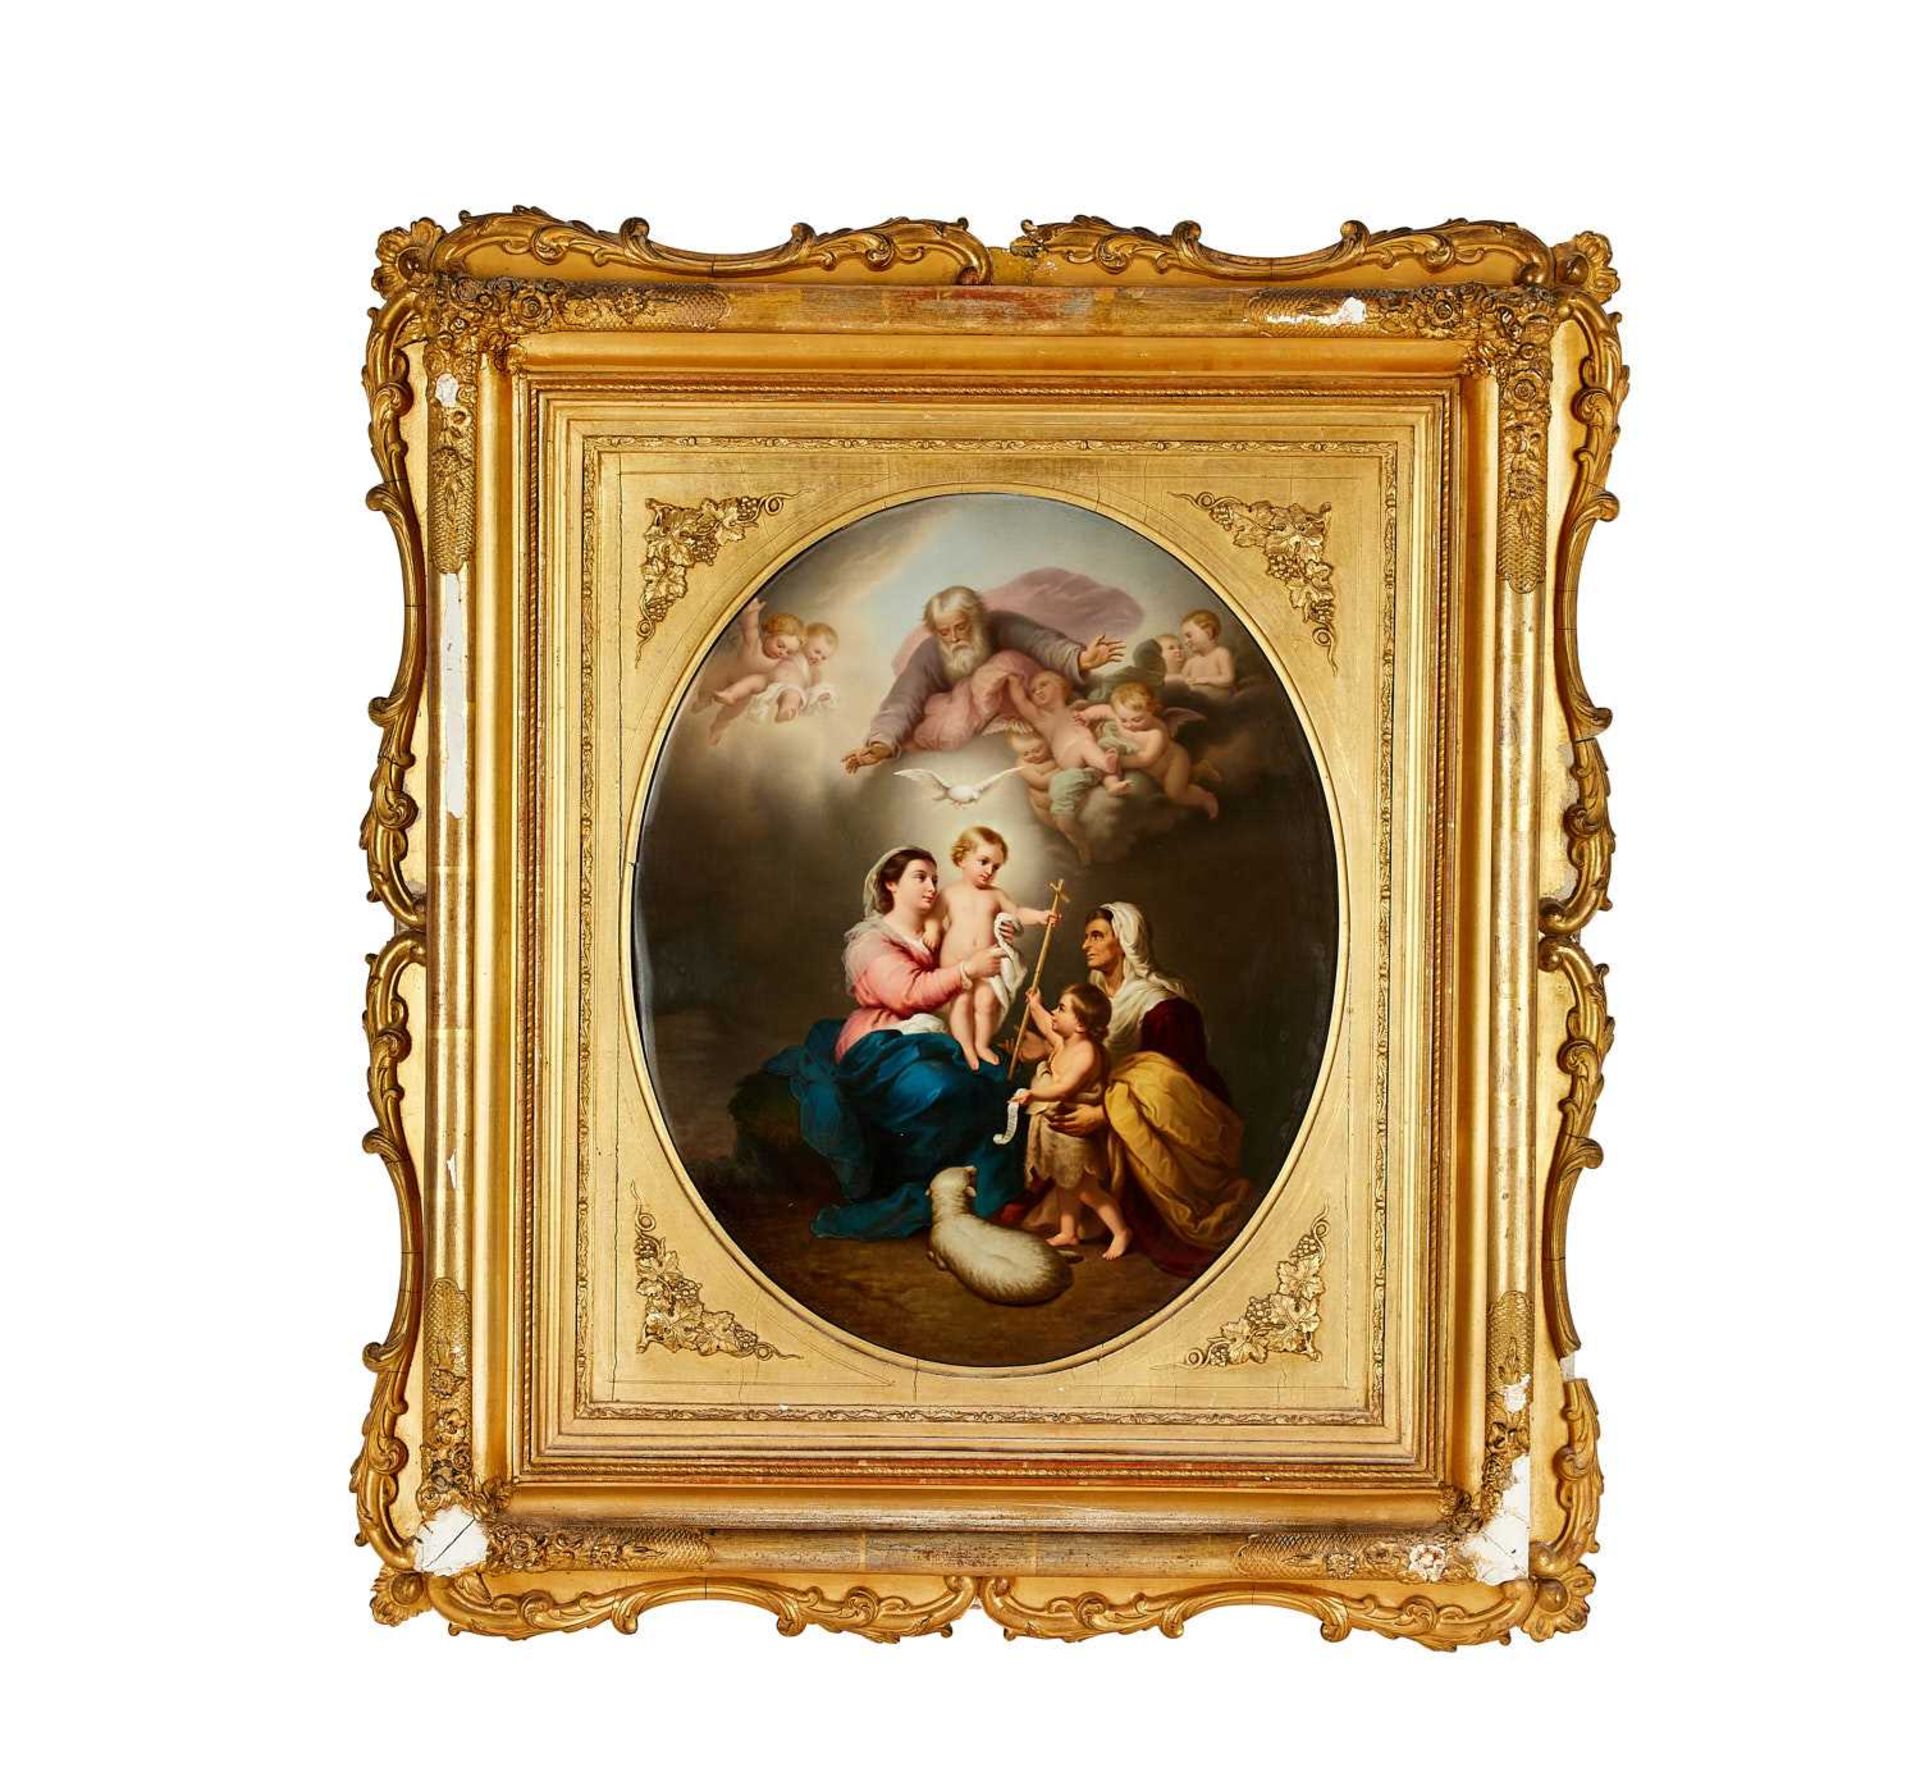 KPM PORCELAIN: A FINE AND LARGE LATE 19TH CENTURY PLAQUE DEPICTING THE MADONNA AND CHILD